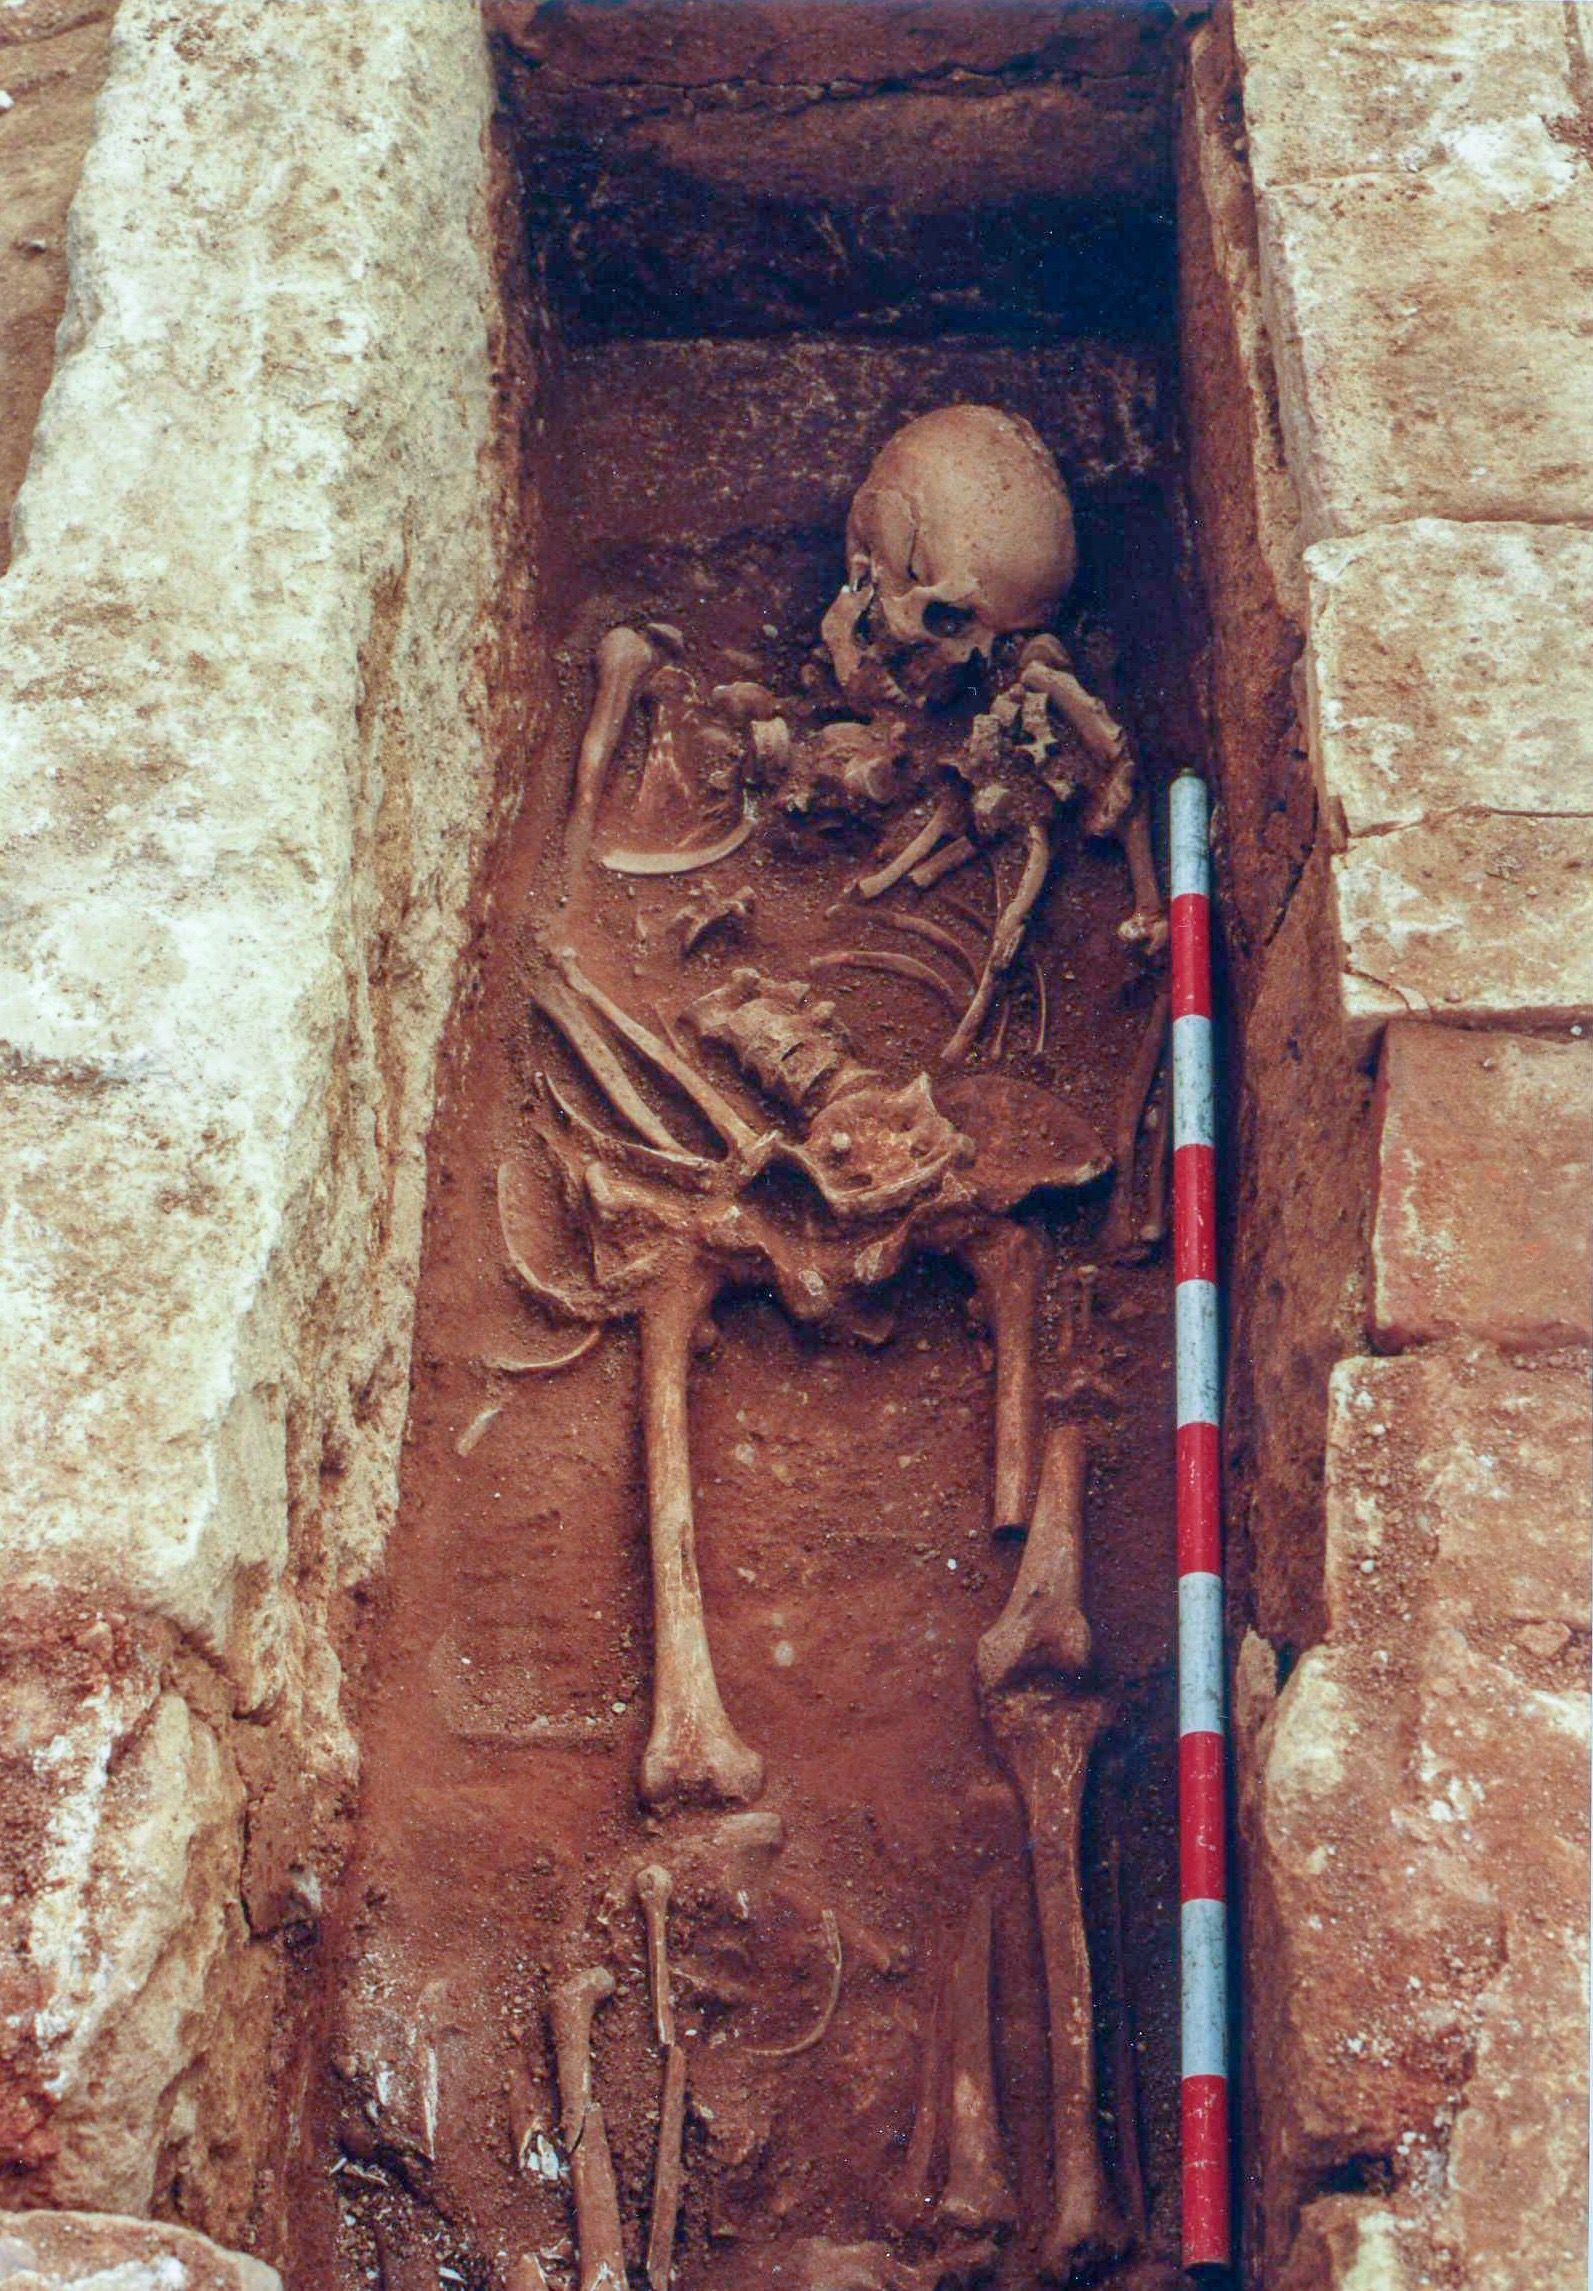 Skeleton of a Christian buried in Cercadilla who lived during the Caliphate years (756-929), bearing an axe wound to the head.